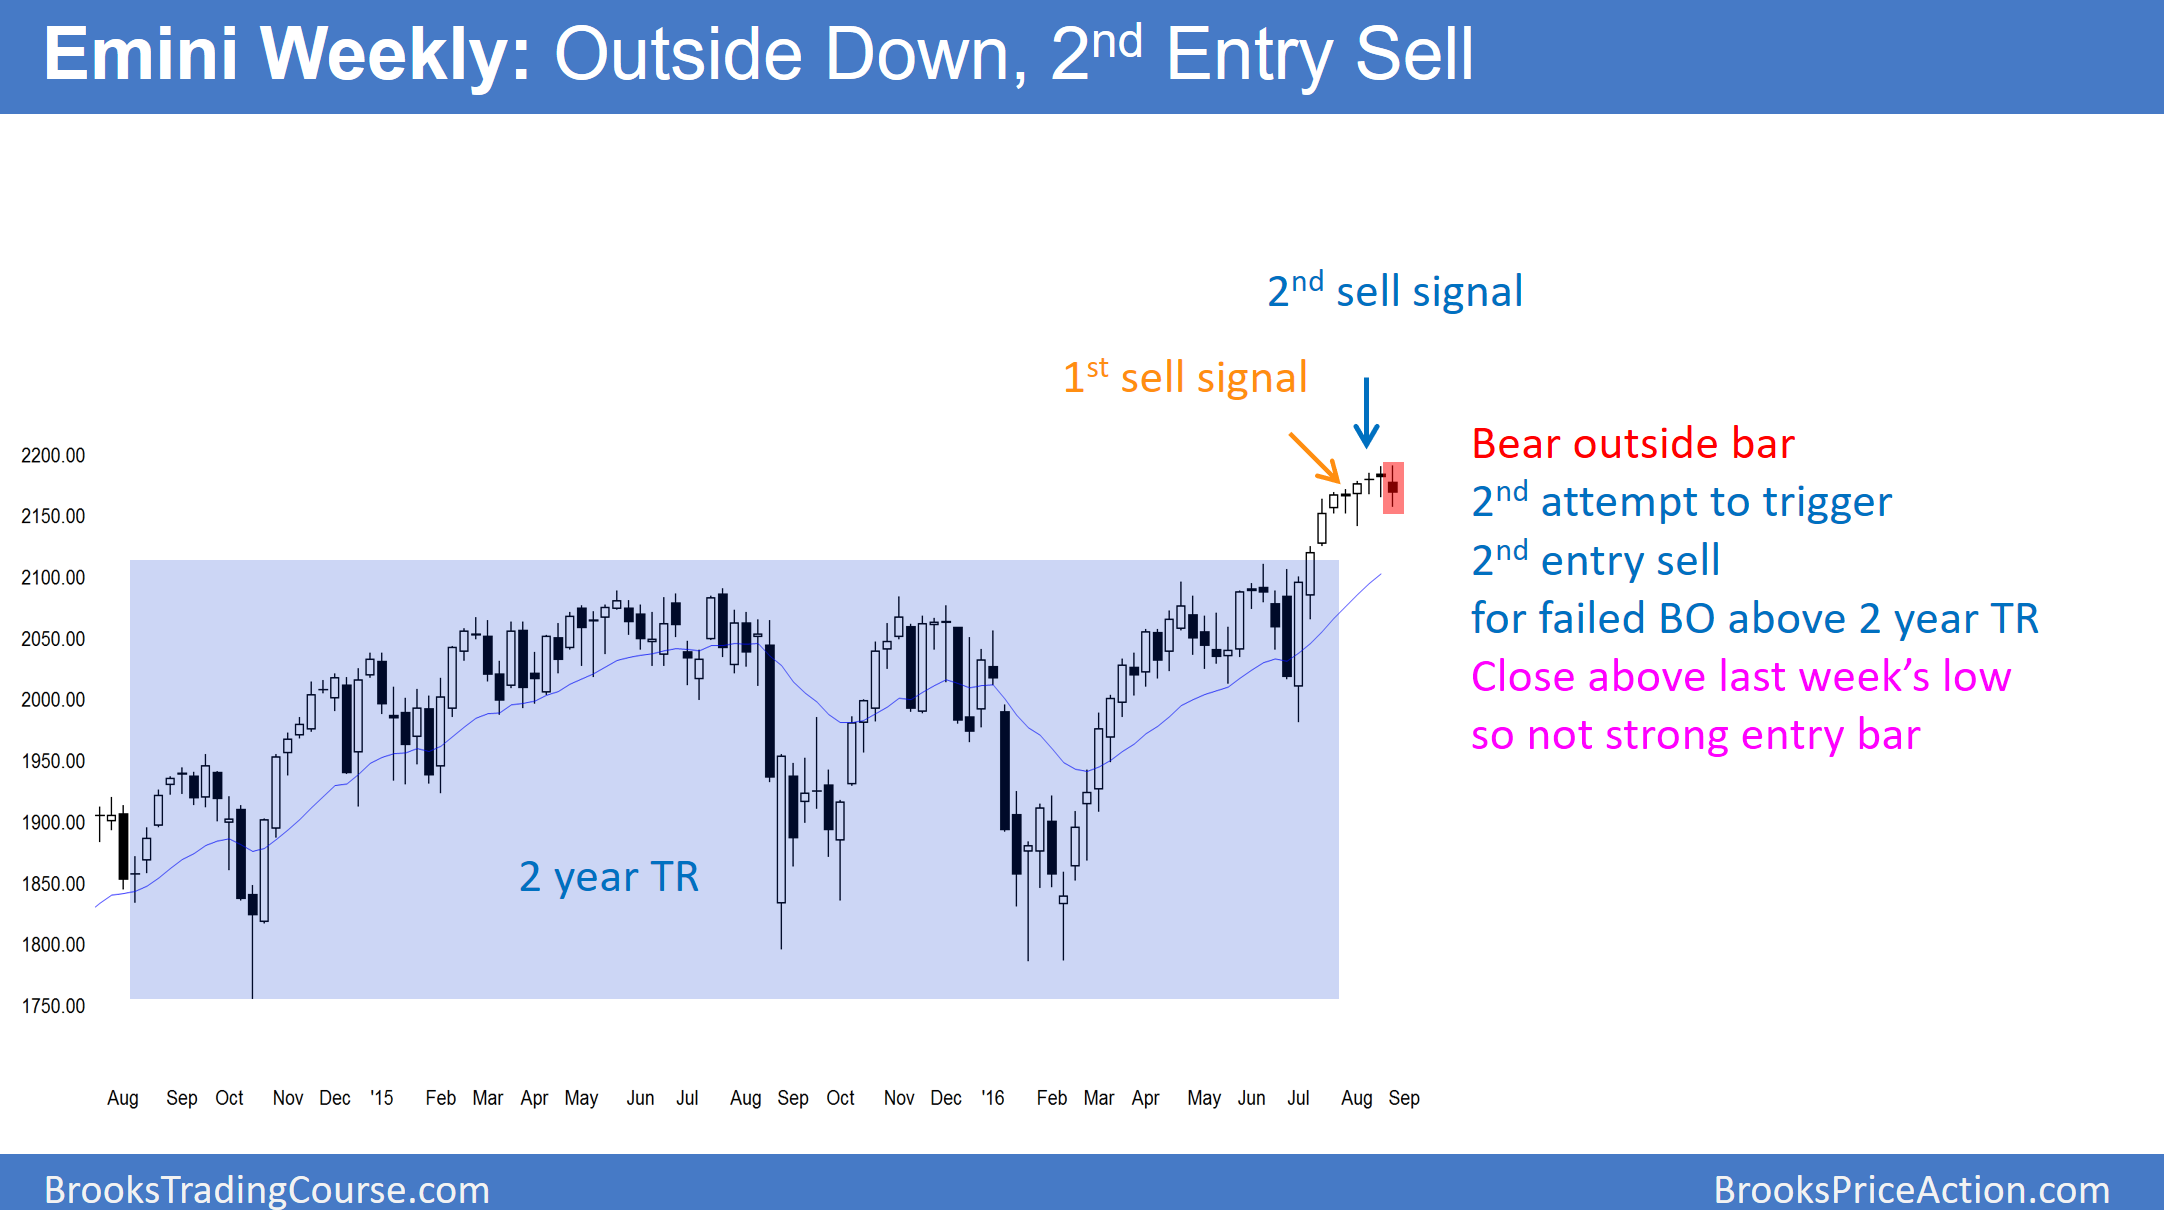 Weekly S&P500 Emini futures candlestick chart